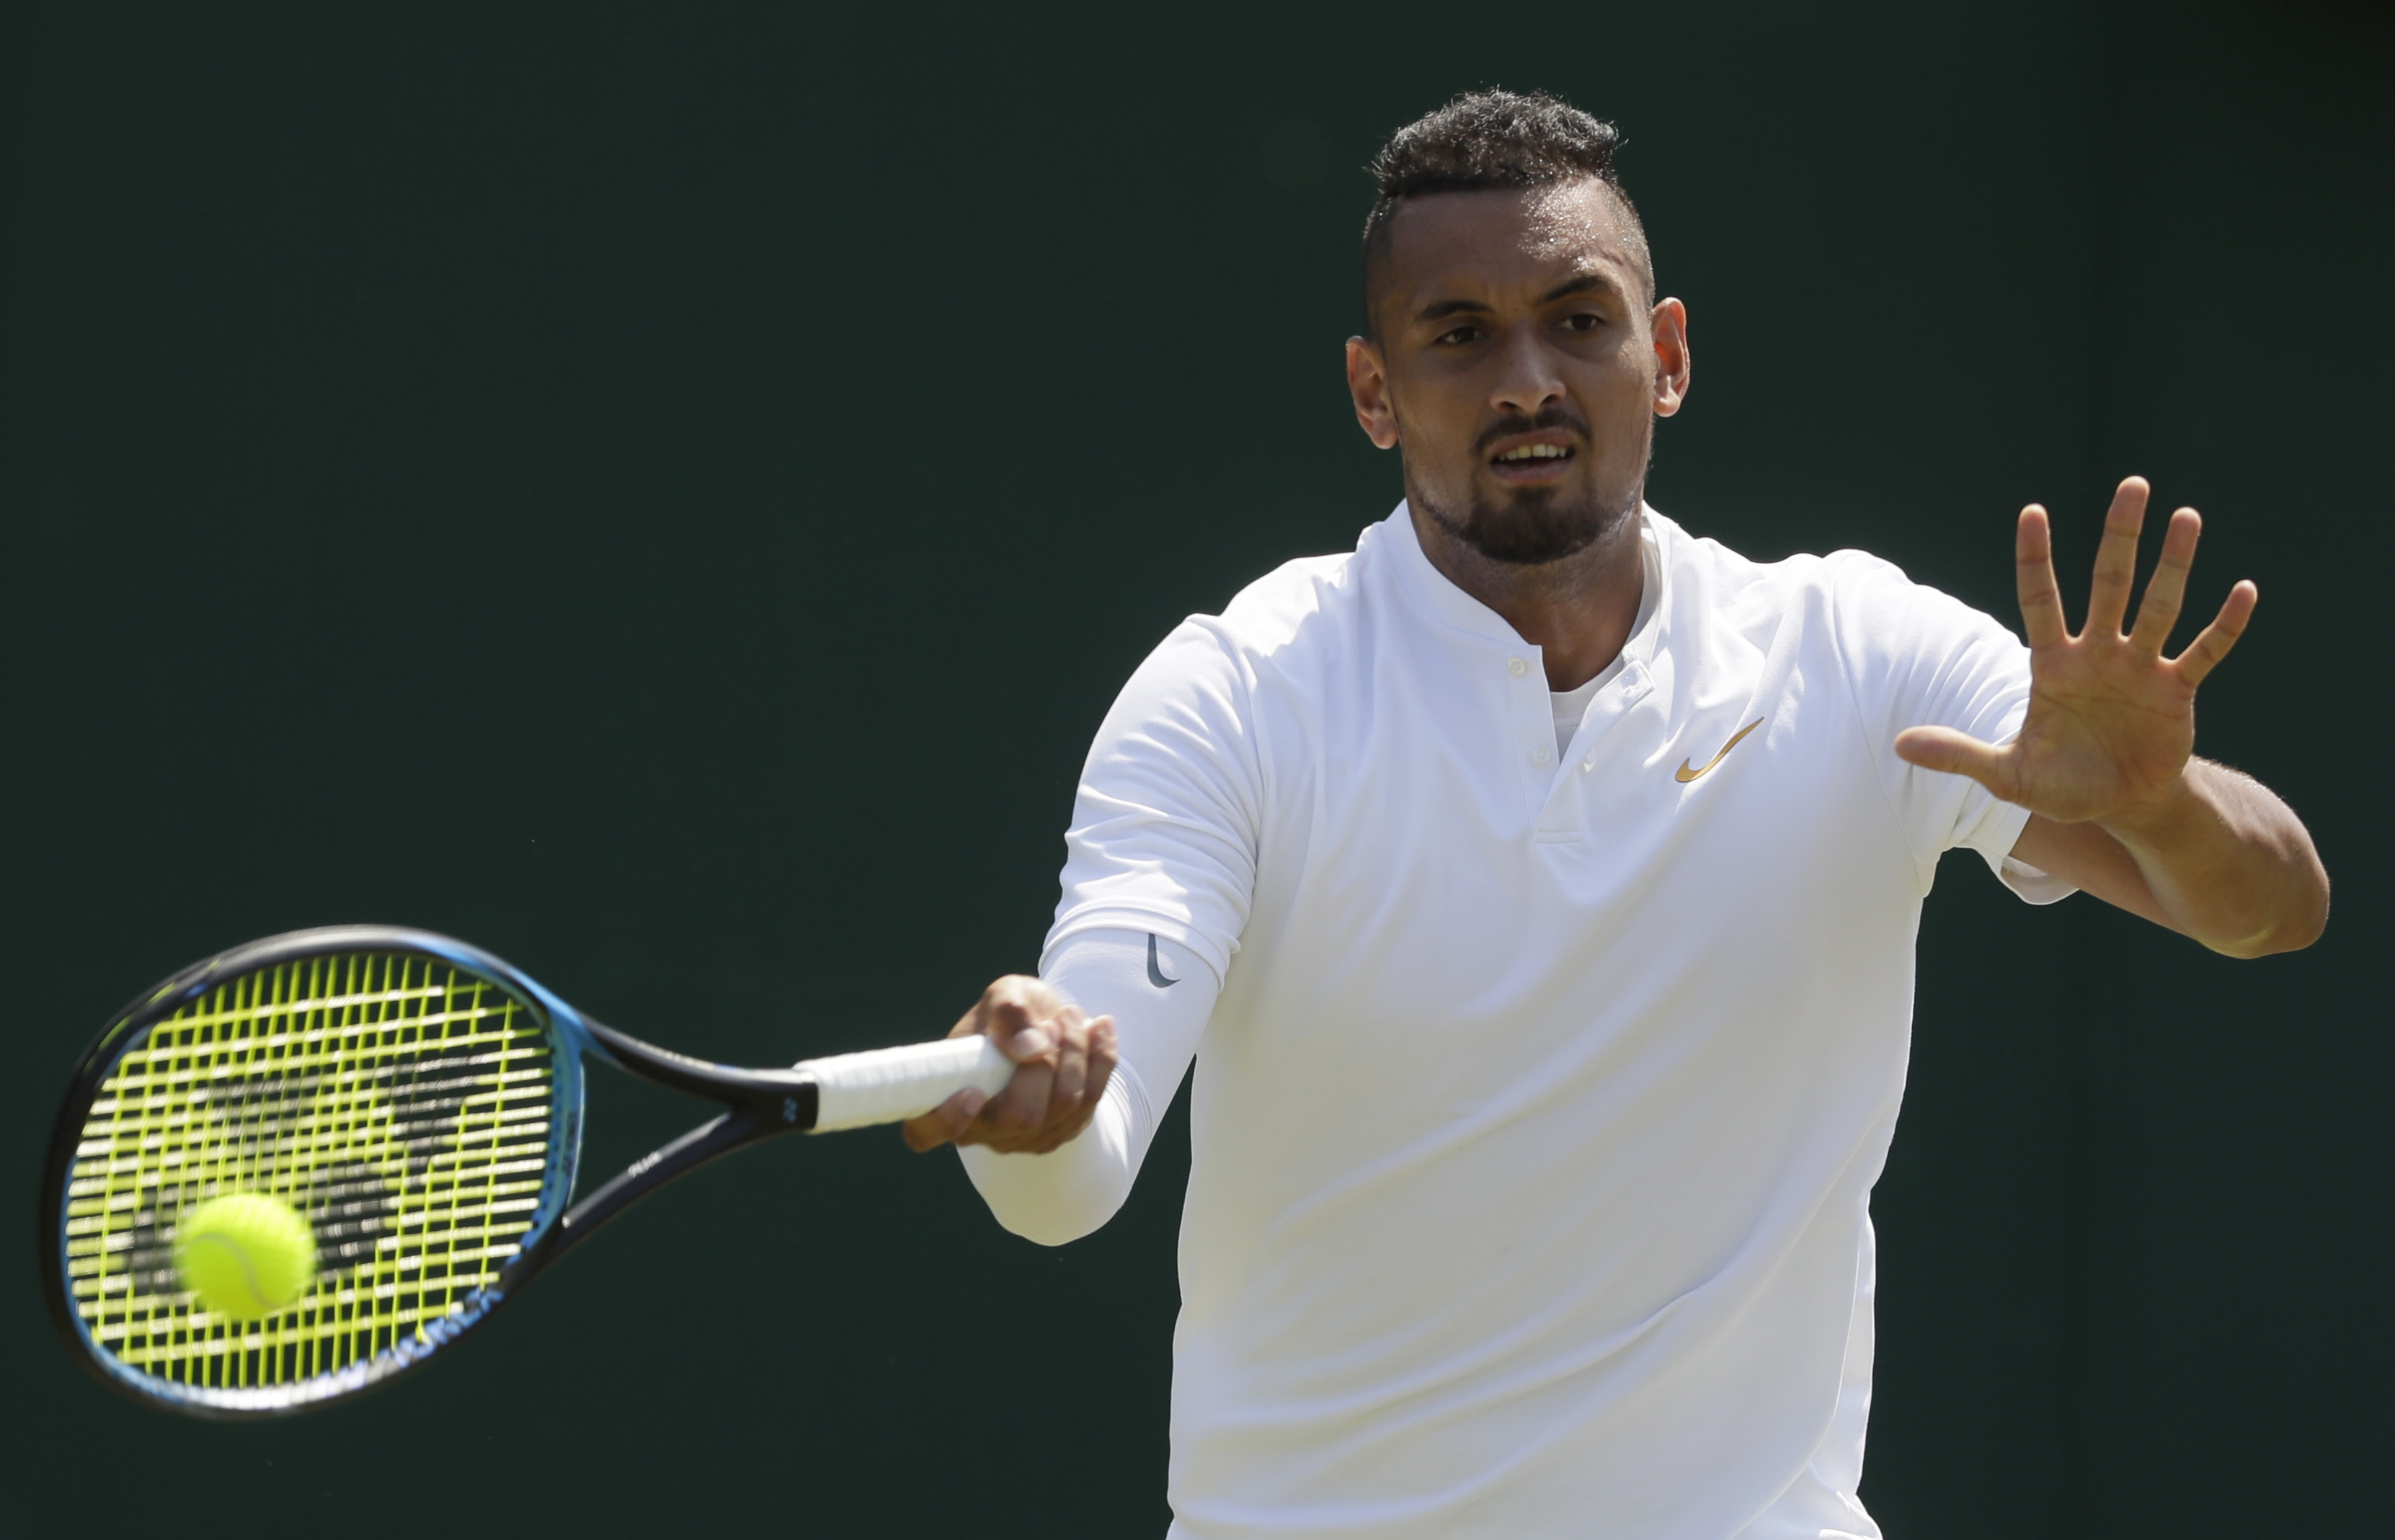 Nick Kyrgios is leading an Australian charge at Wimbledon